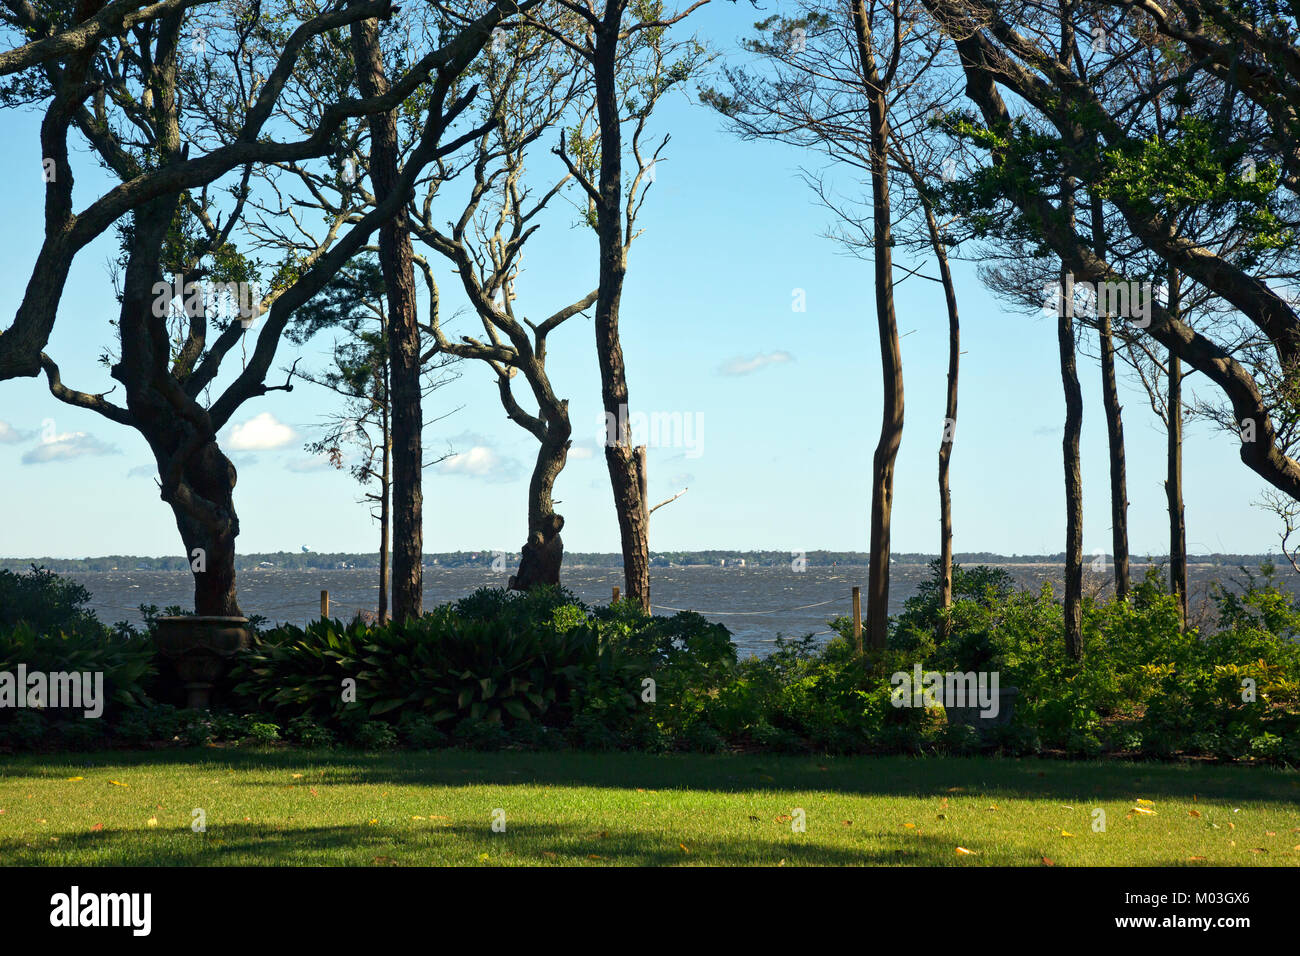 NC01354-00...NORTH CAROLINA - Overlook Terrace with a view of the Albemarle Sound at the Elizabethan Gardens, at popular tourist attraction in Manteo Stock Photo